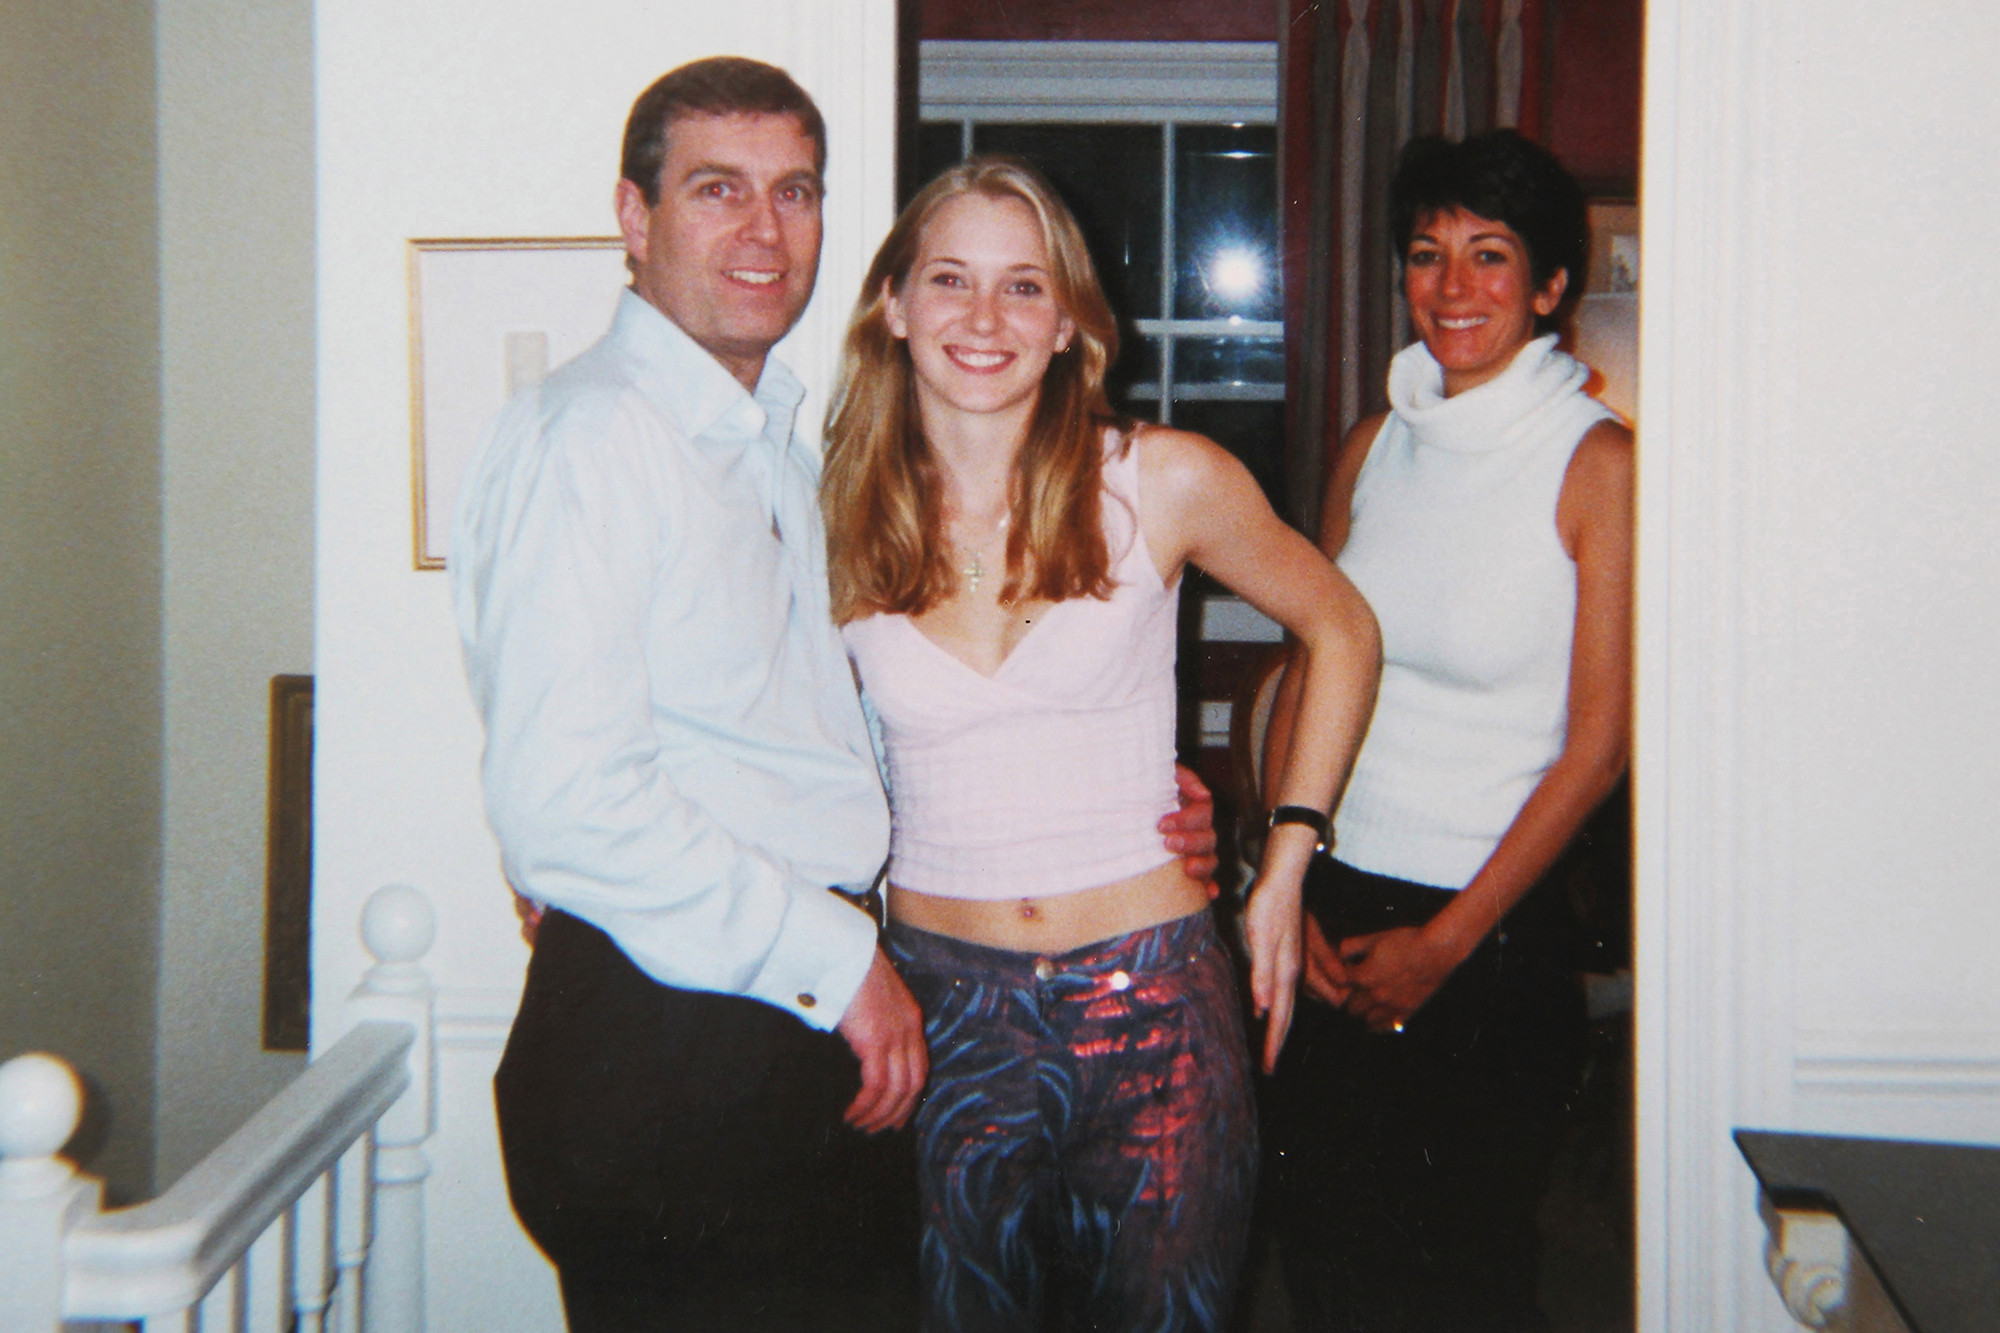 Prince Andrew?s accuser Virginia Giuffre asked to hand over their infamous photo